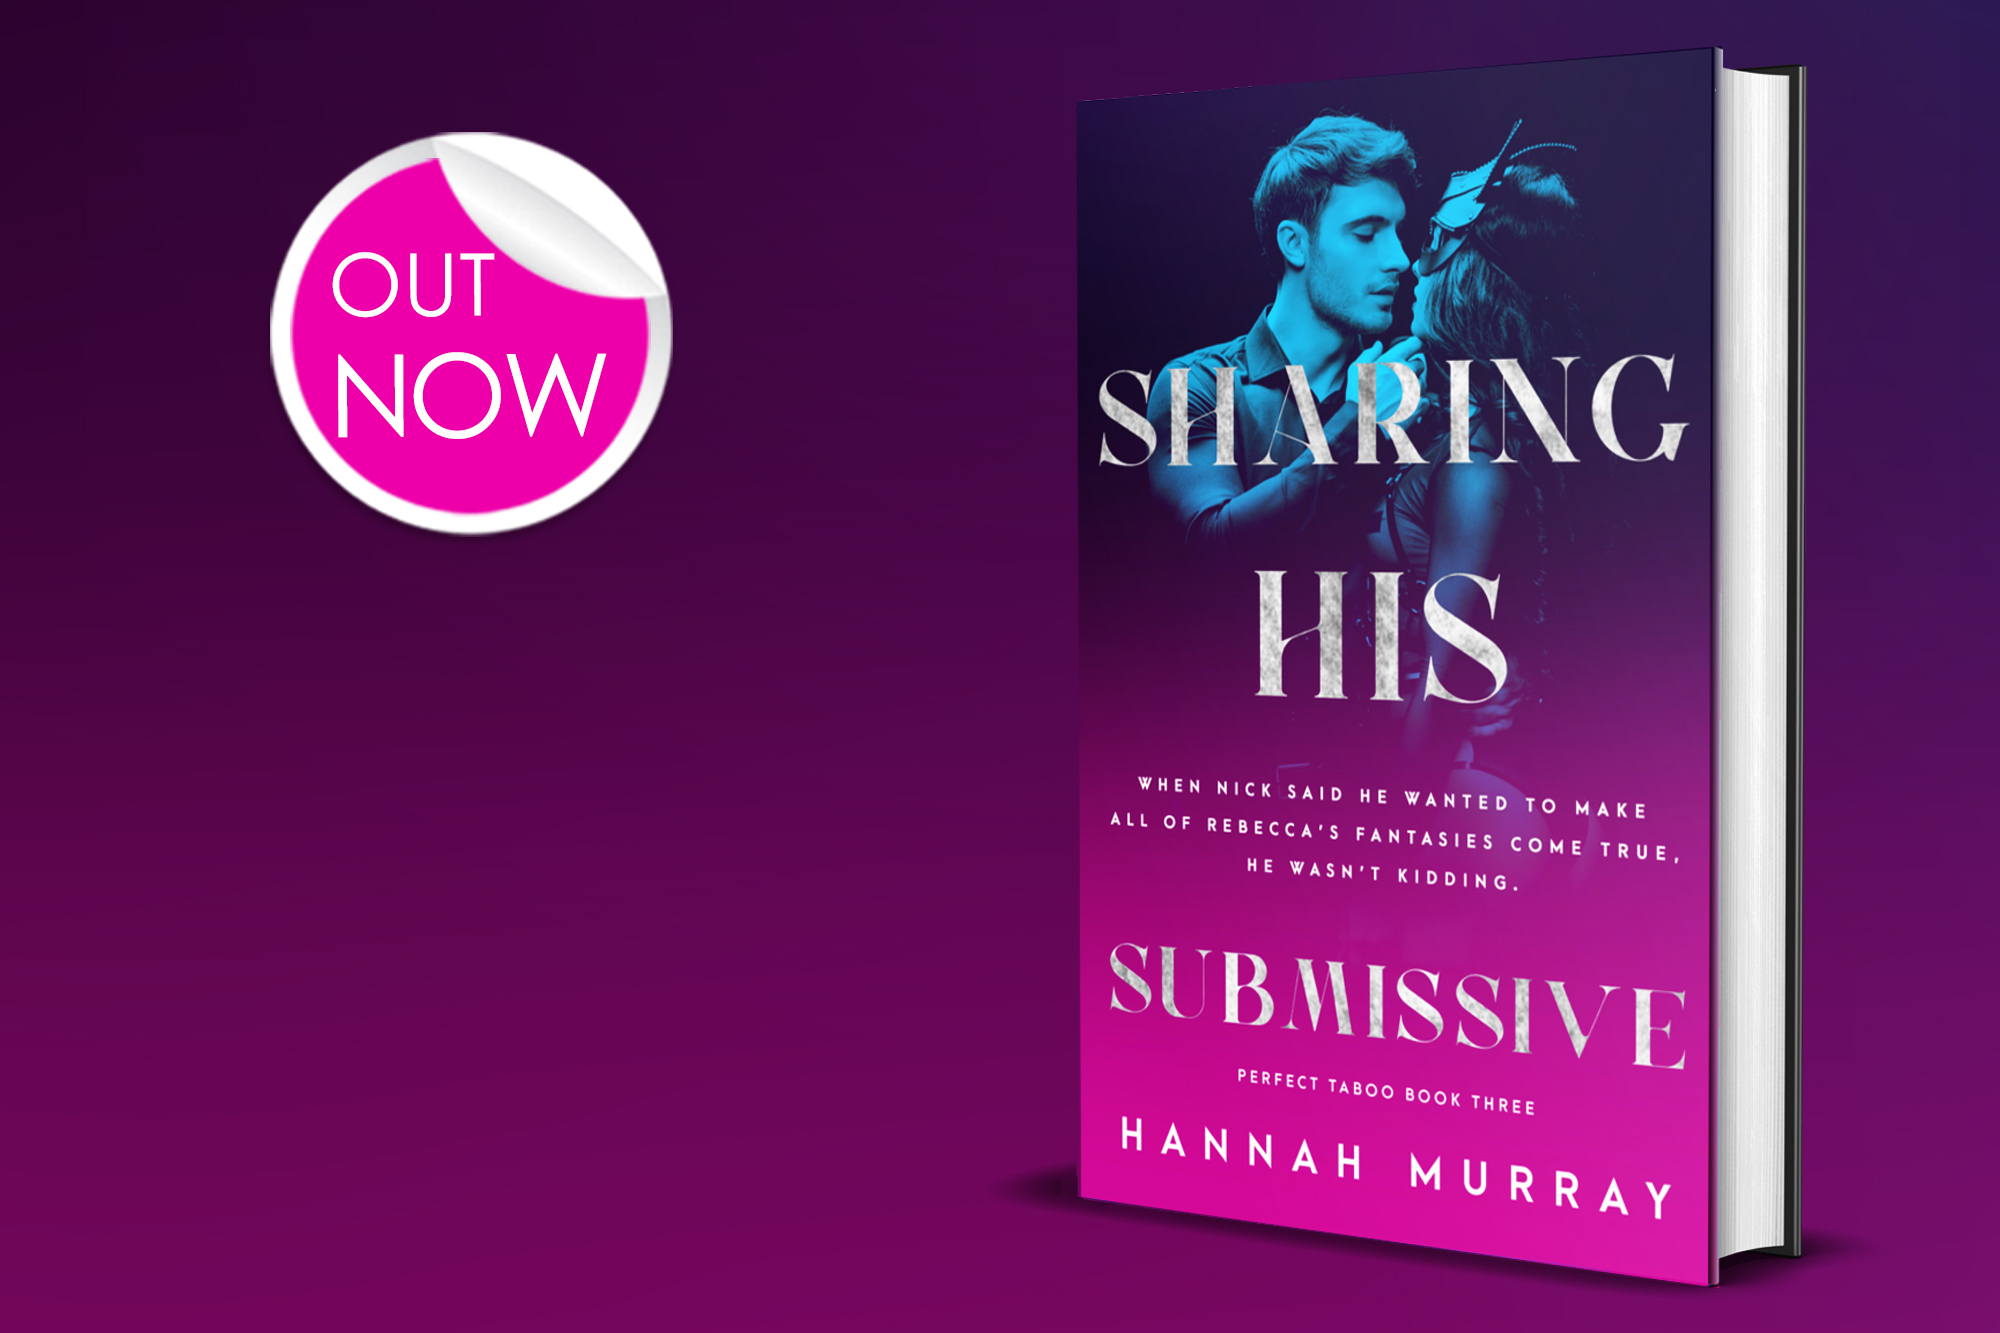 Sharing His Submissive by Hannah Murray